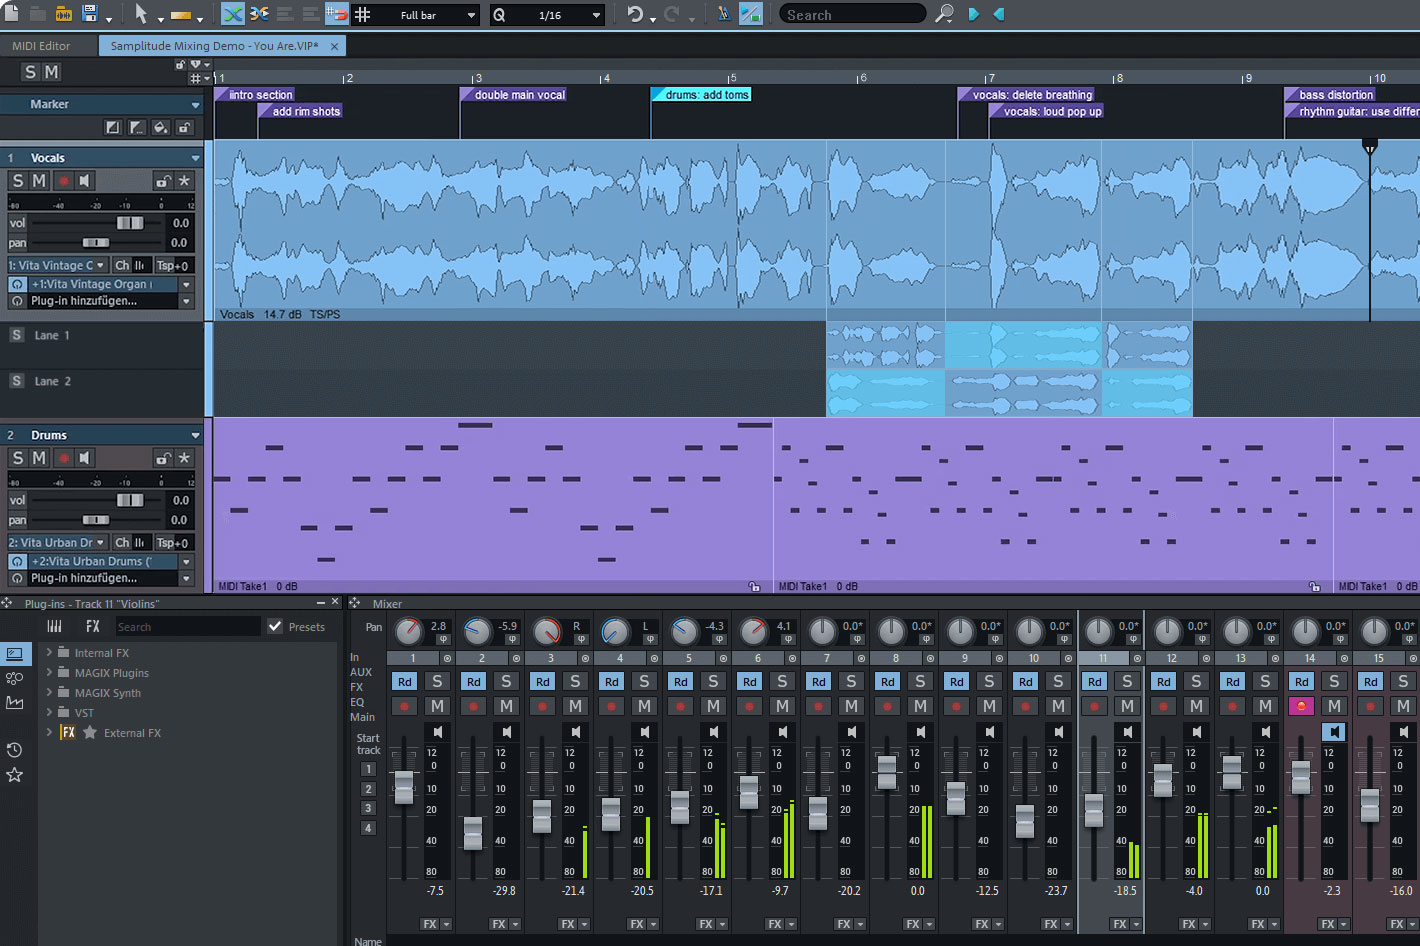 MAGIX launches Samplitude Pro X8 and the Pro X8 Suite